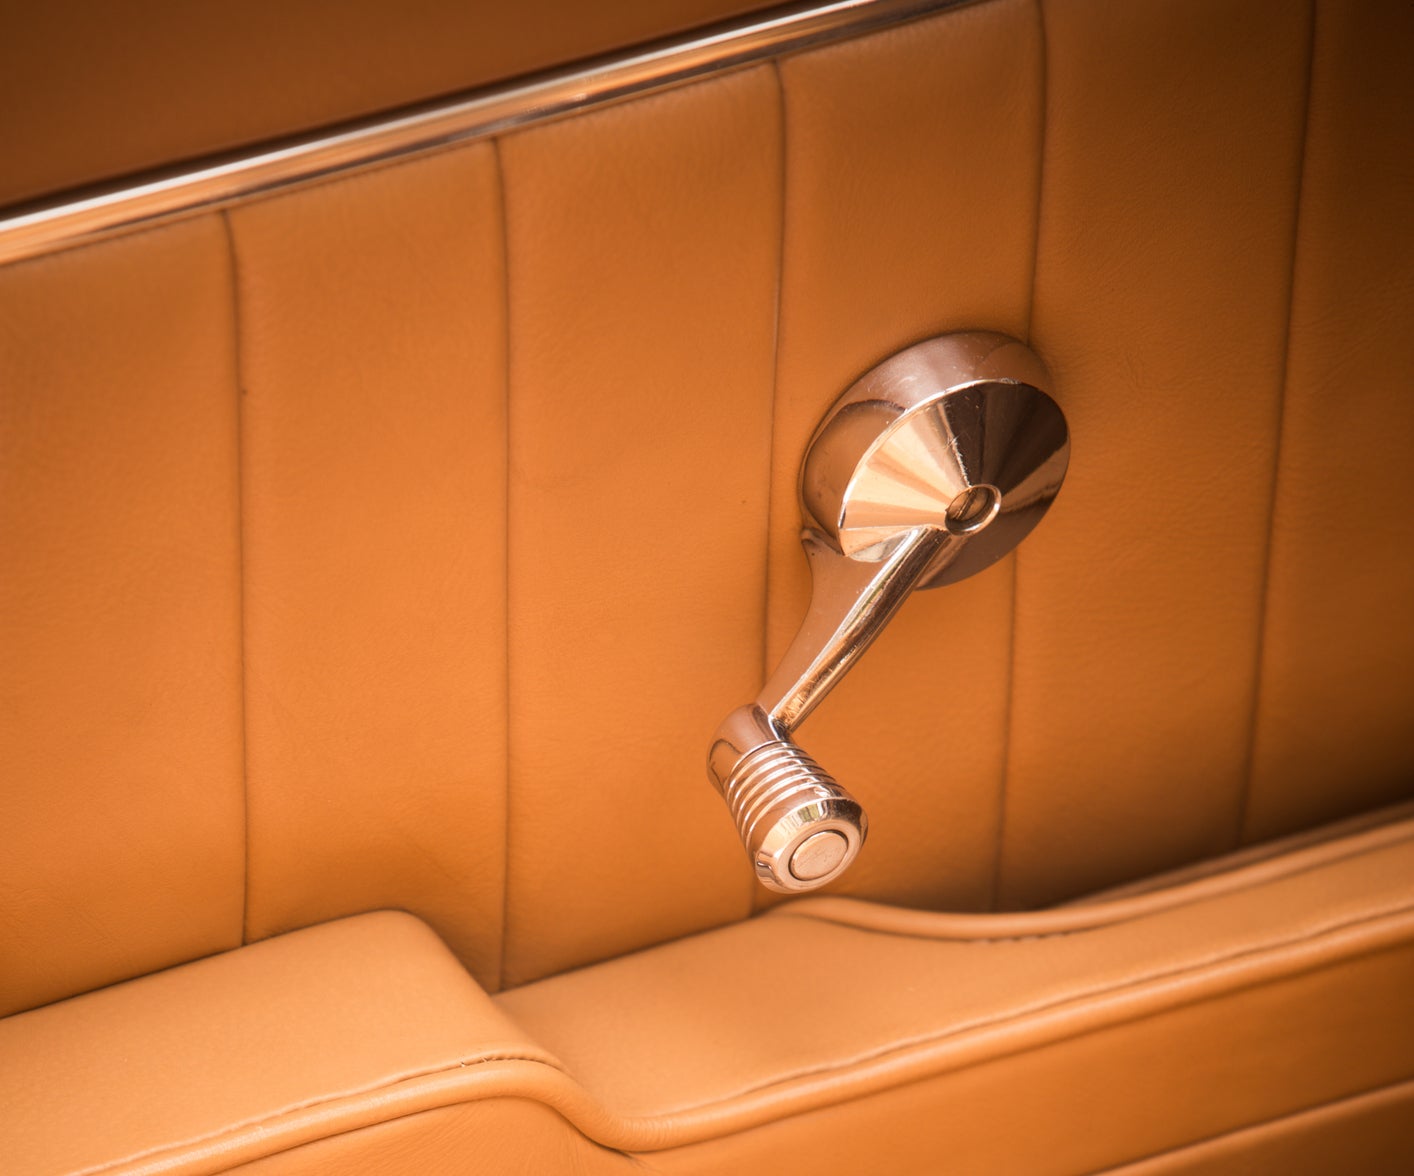 Vintage car&#x27;s interior showing a chrome door handle and leather upholstery